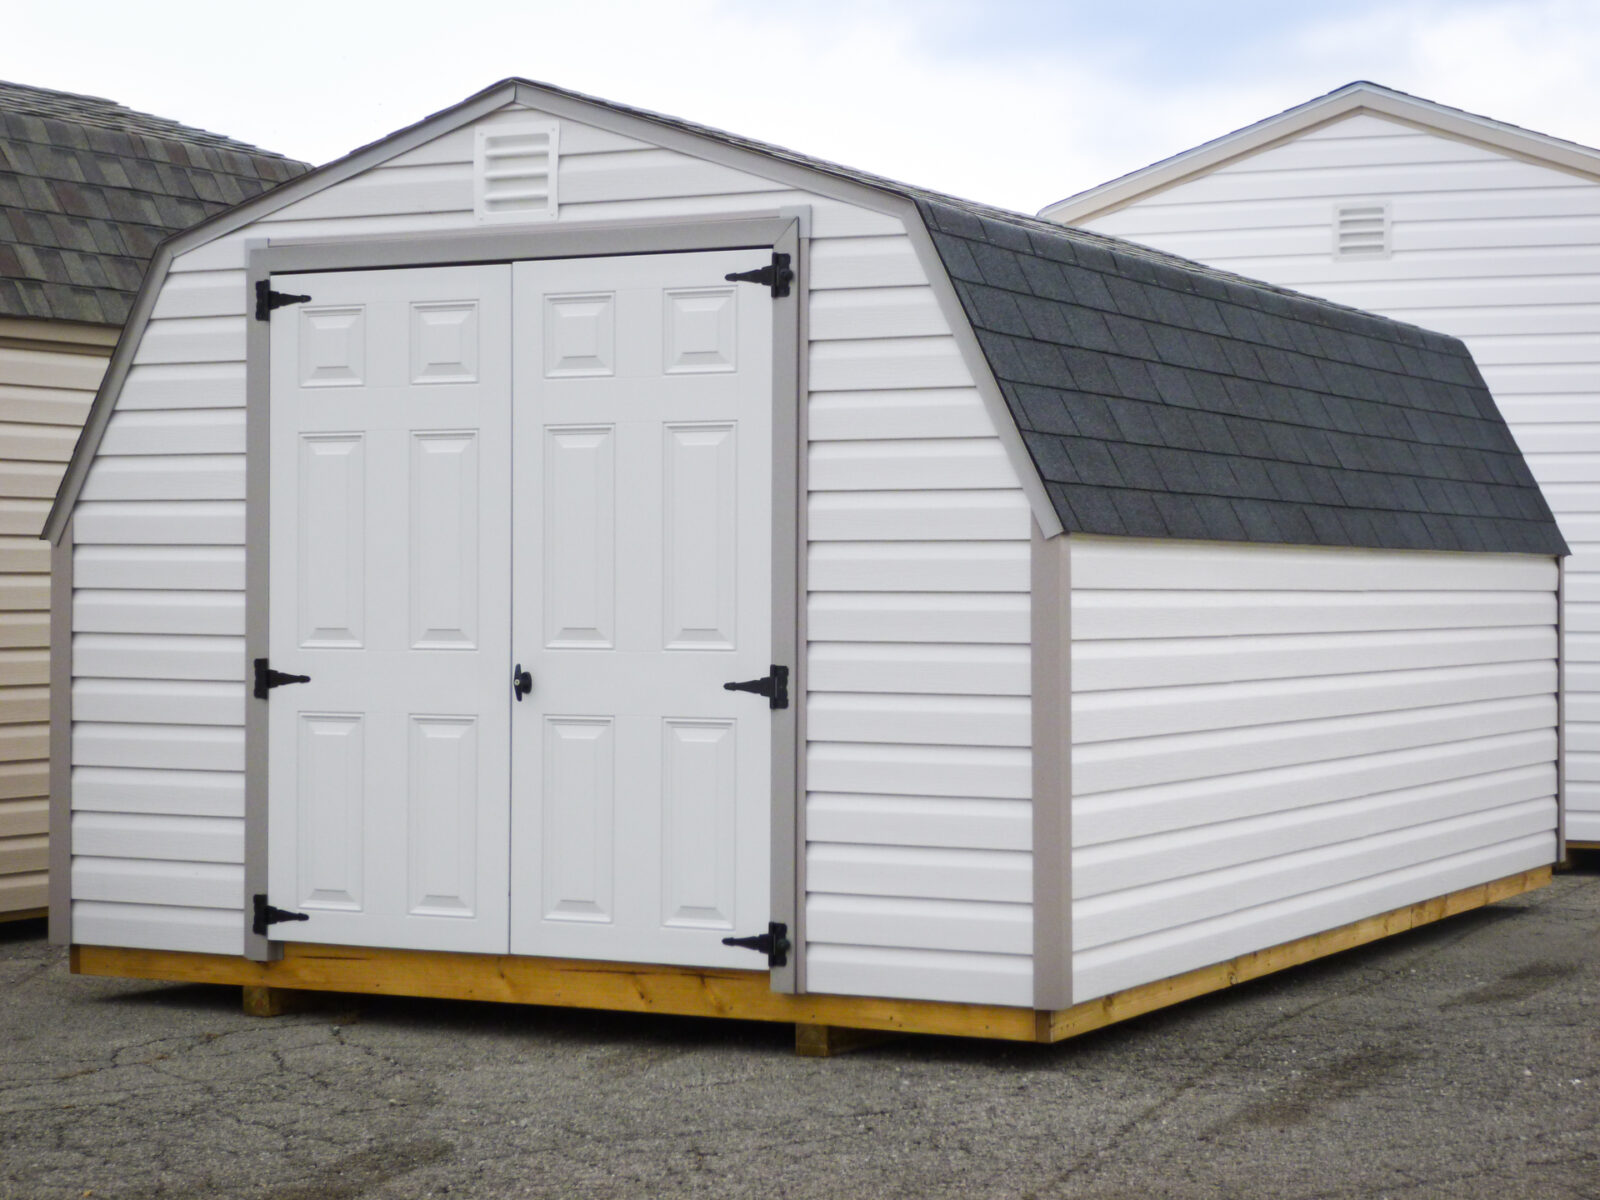 A portable shed in Kentucky with white vinyl siding, a shingle roof, and double doors